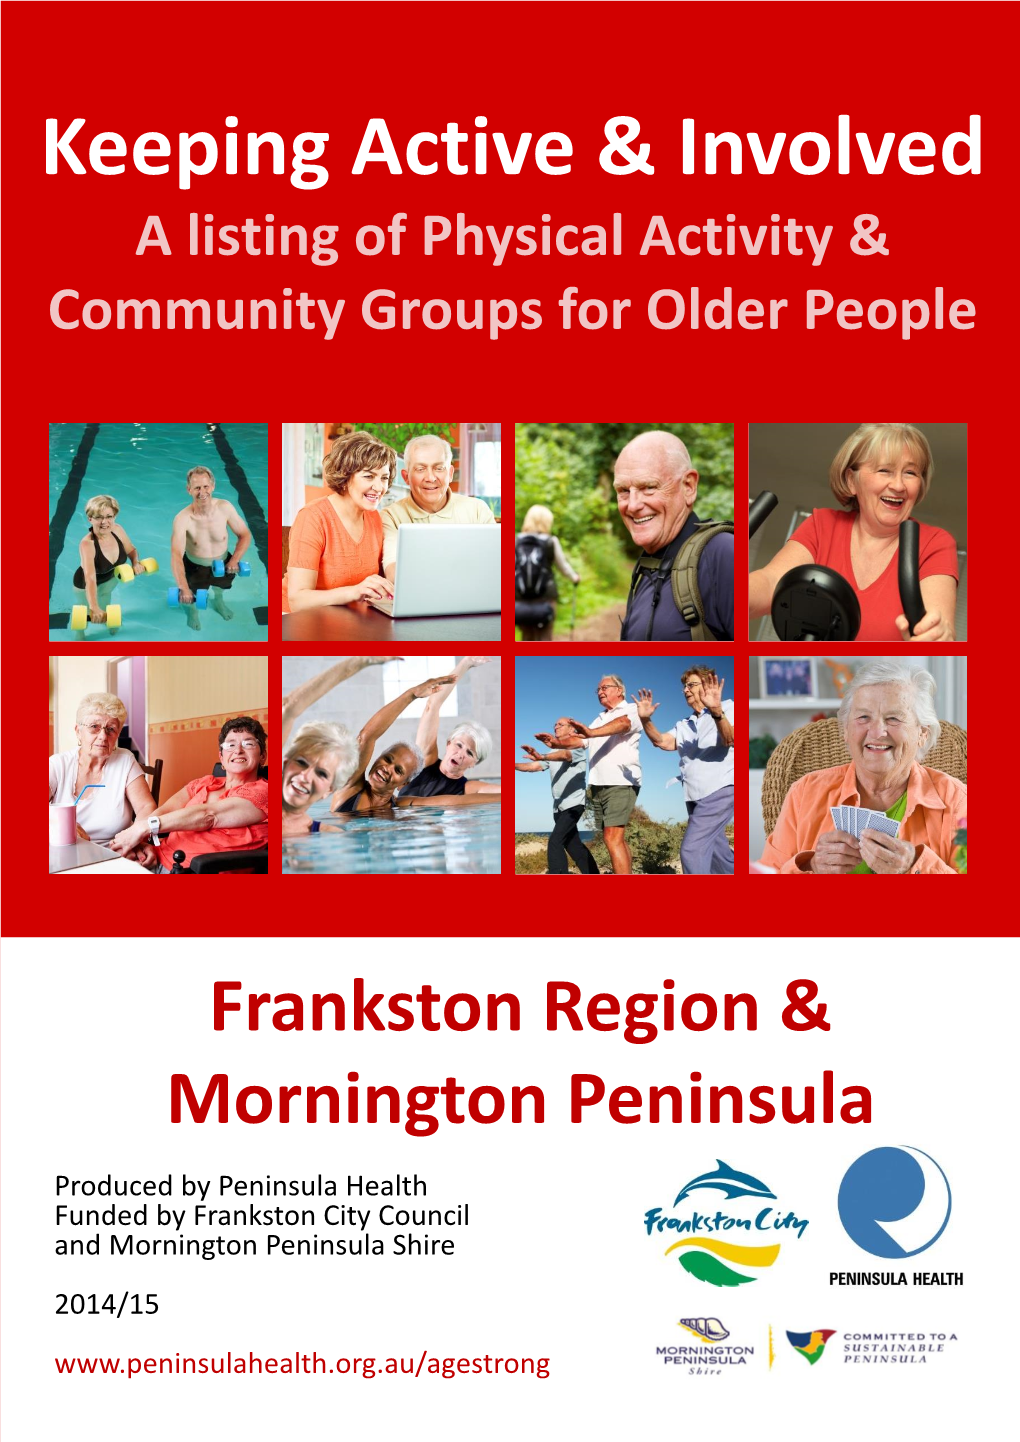 A Listing of Physical Activity & Community Groups for Older People